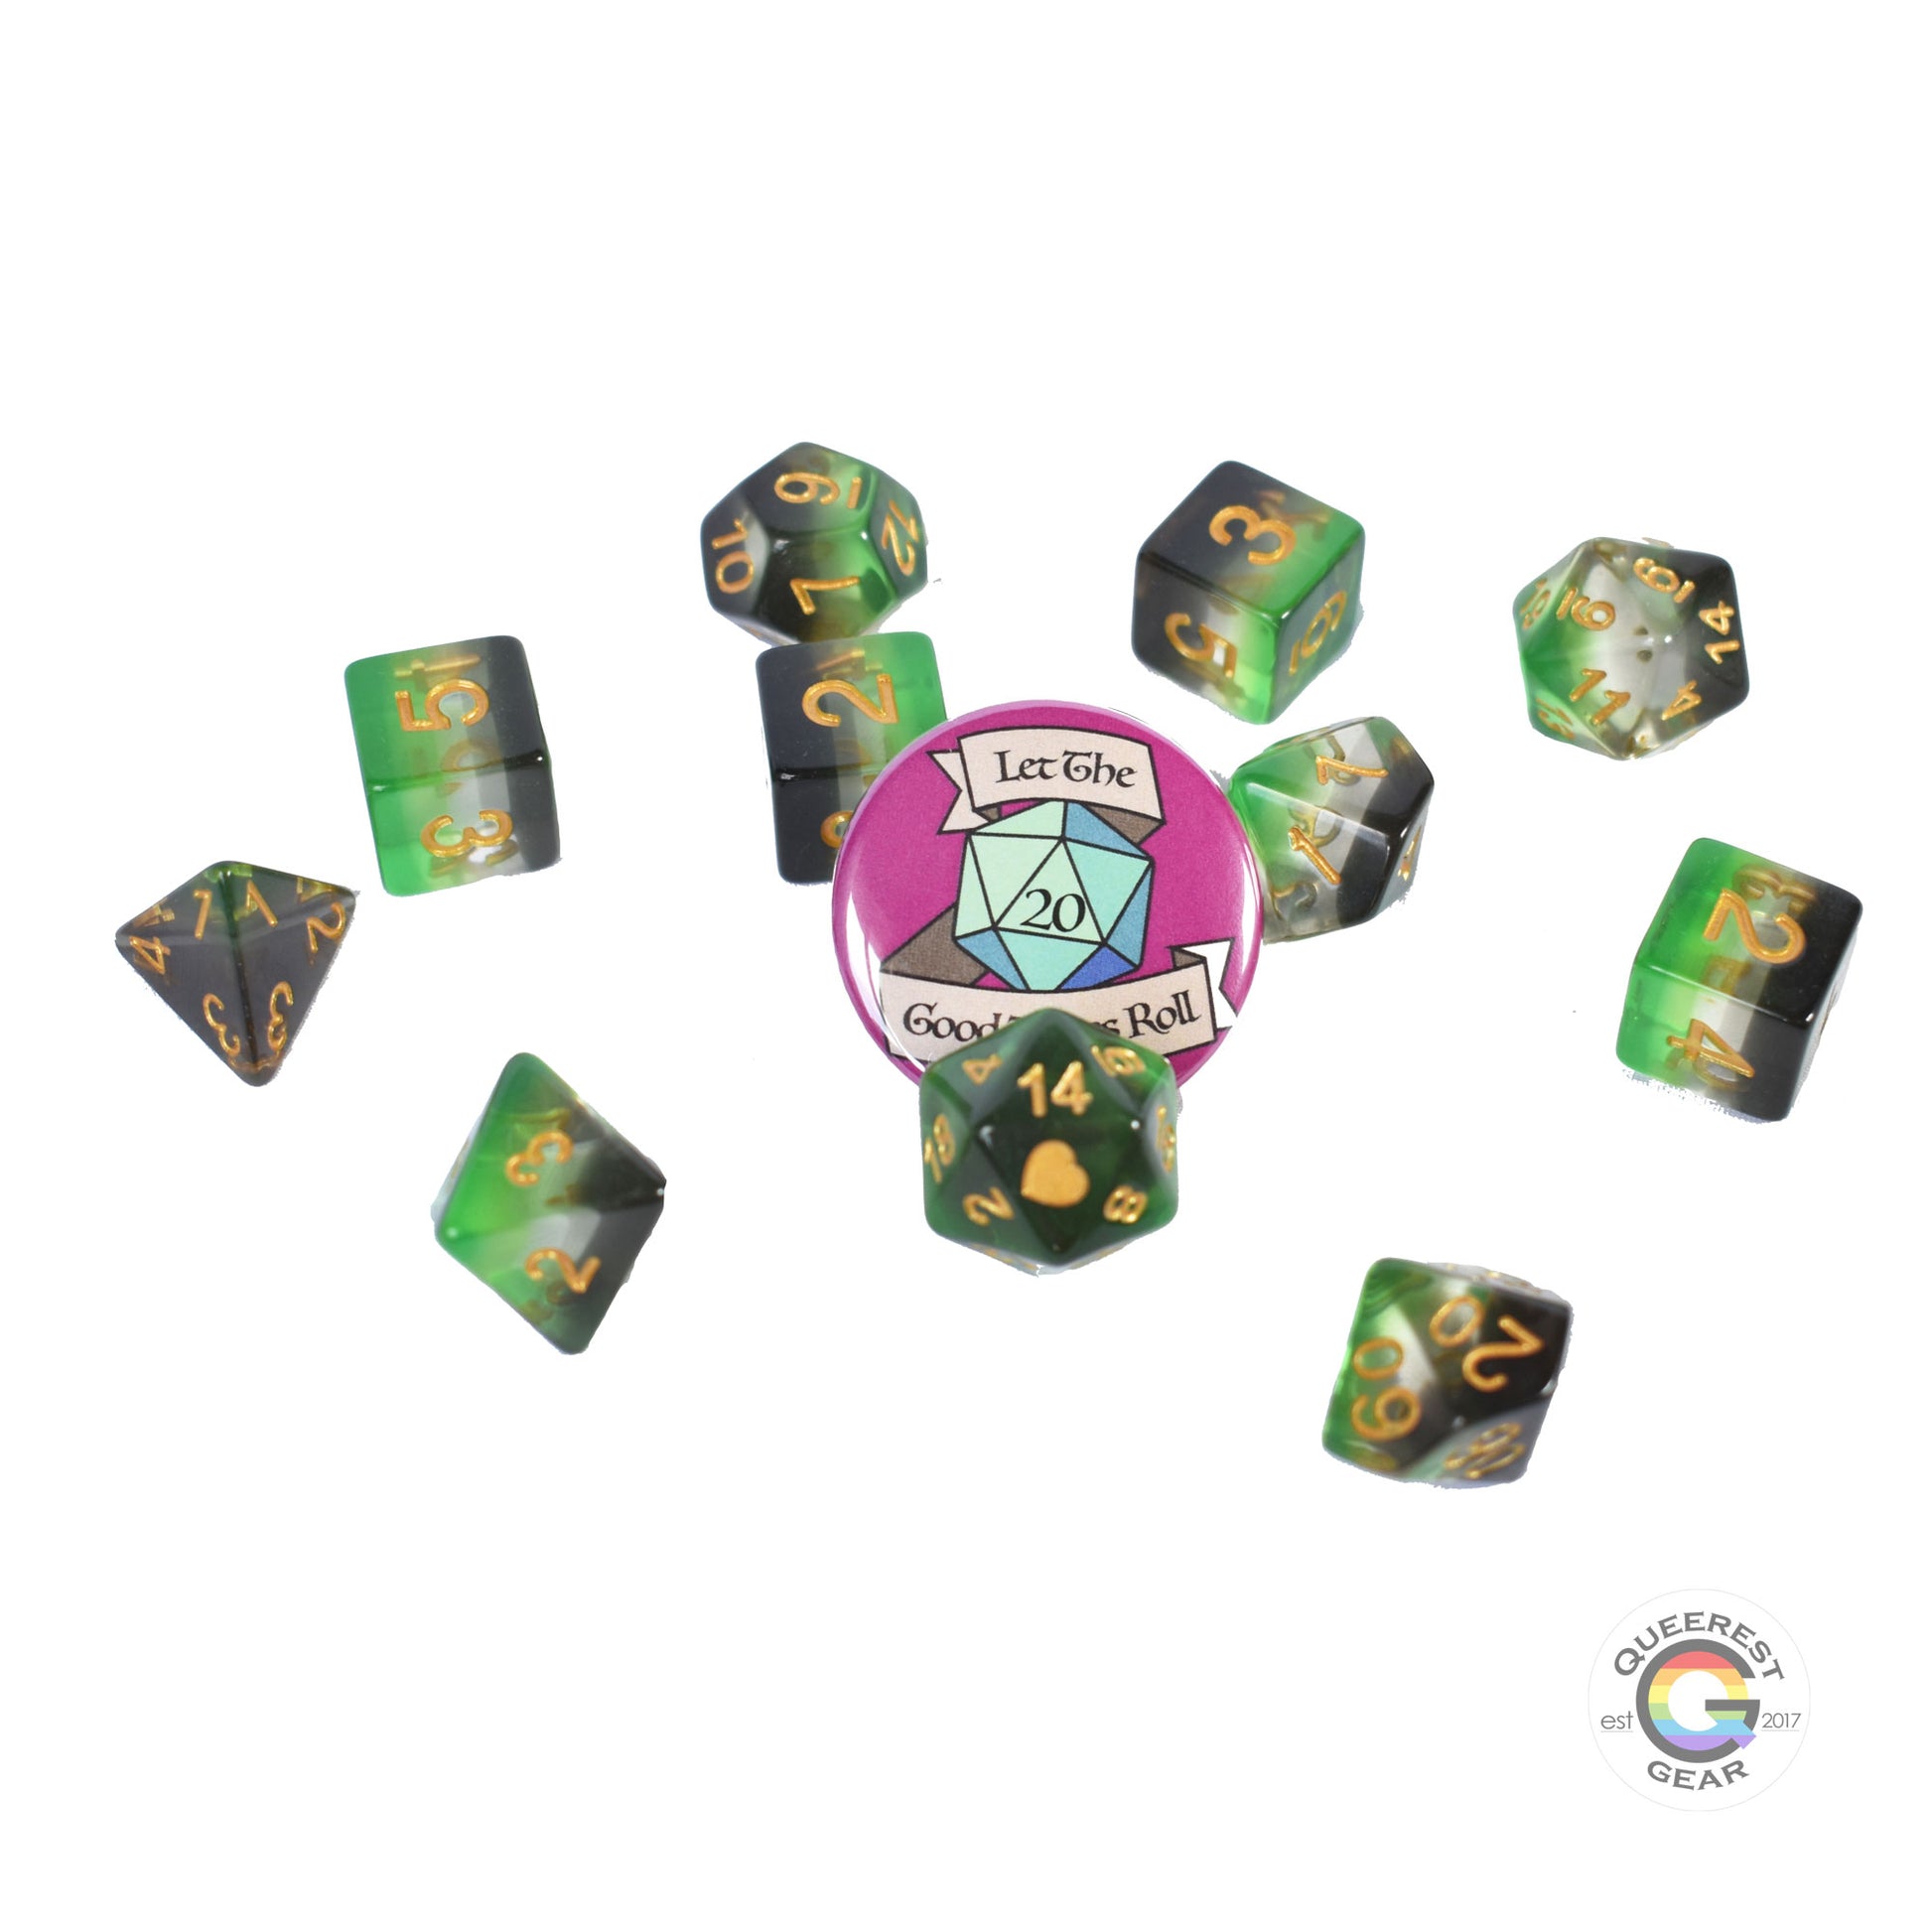 11 piece set of polyhedral dice scattered on a white background. They are transparent and colored in the stripes of the aromantic flag with gold ink. There is the freebie “let the good times roll” pinback button among them. 